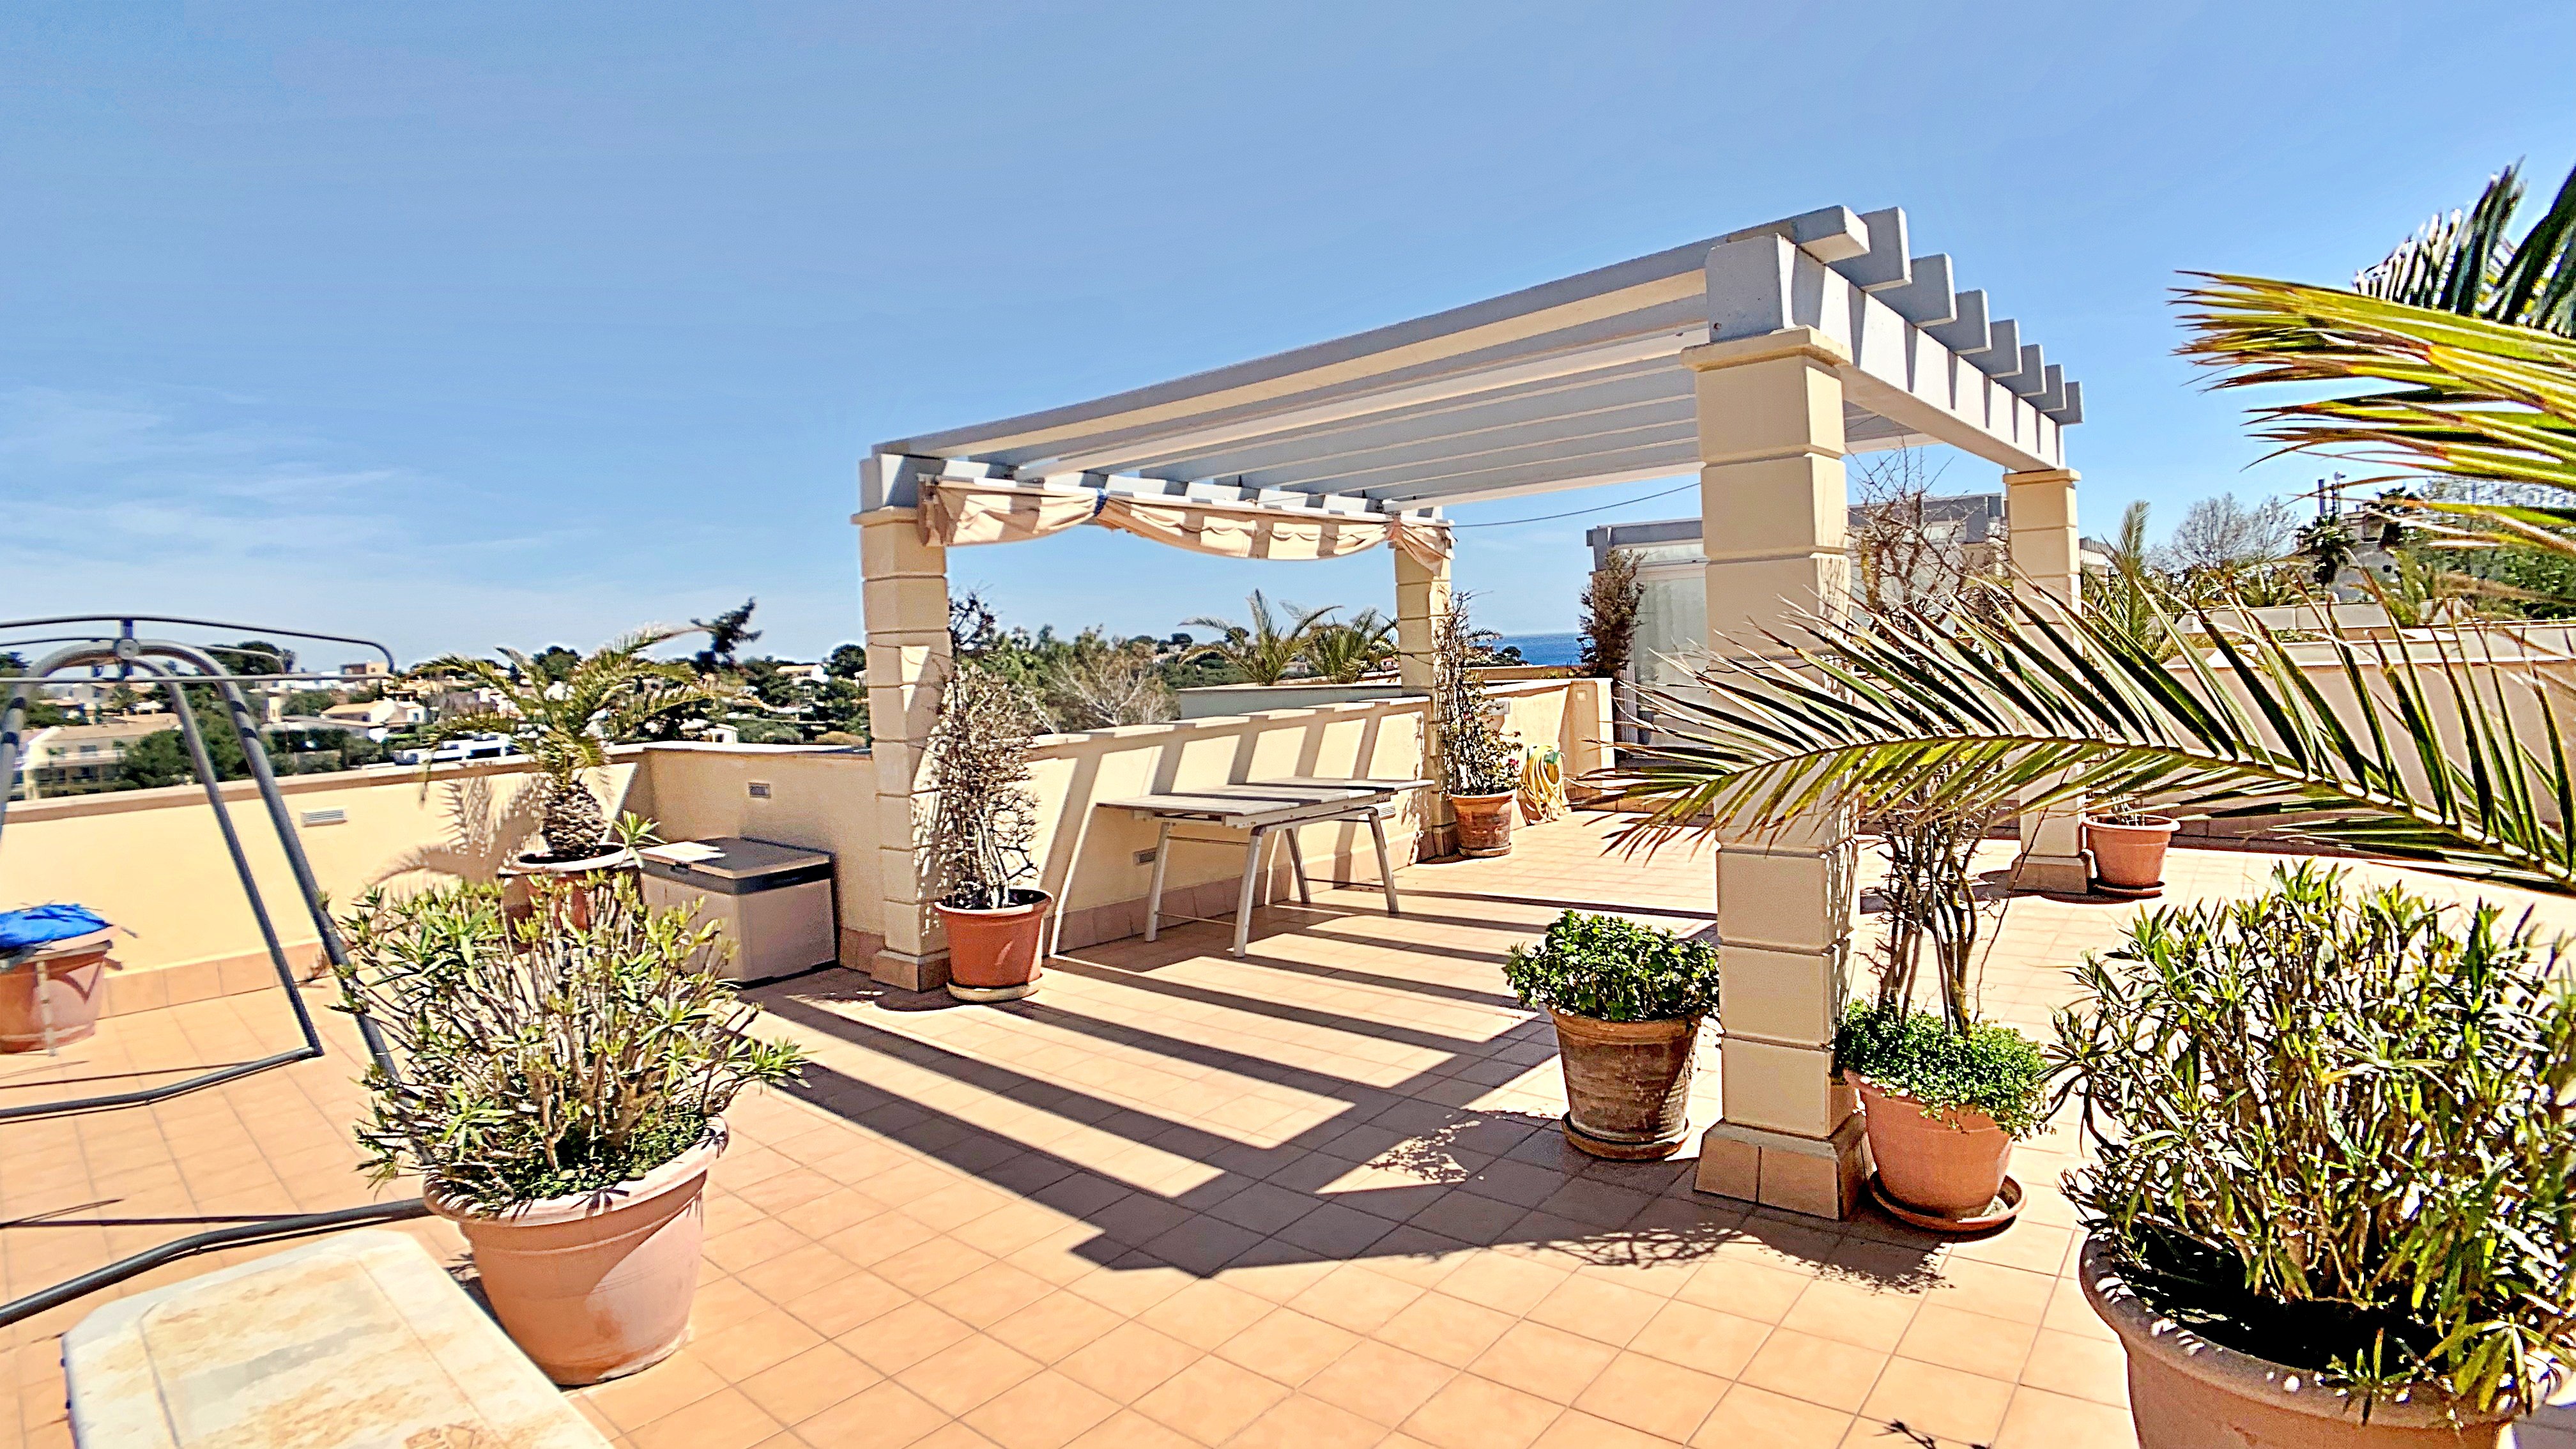 Duplex penthouse with sea views, 100-meter private solarium terrace and community pool.